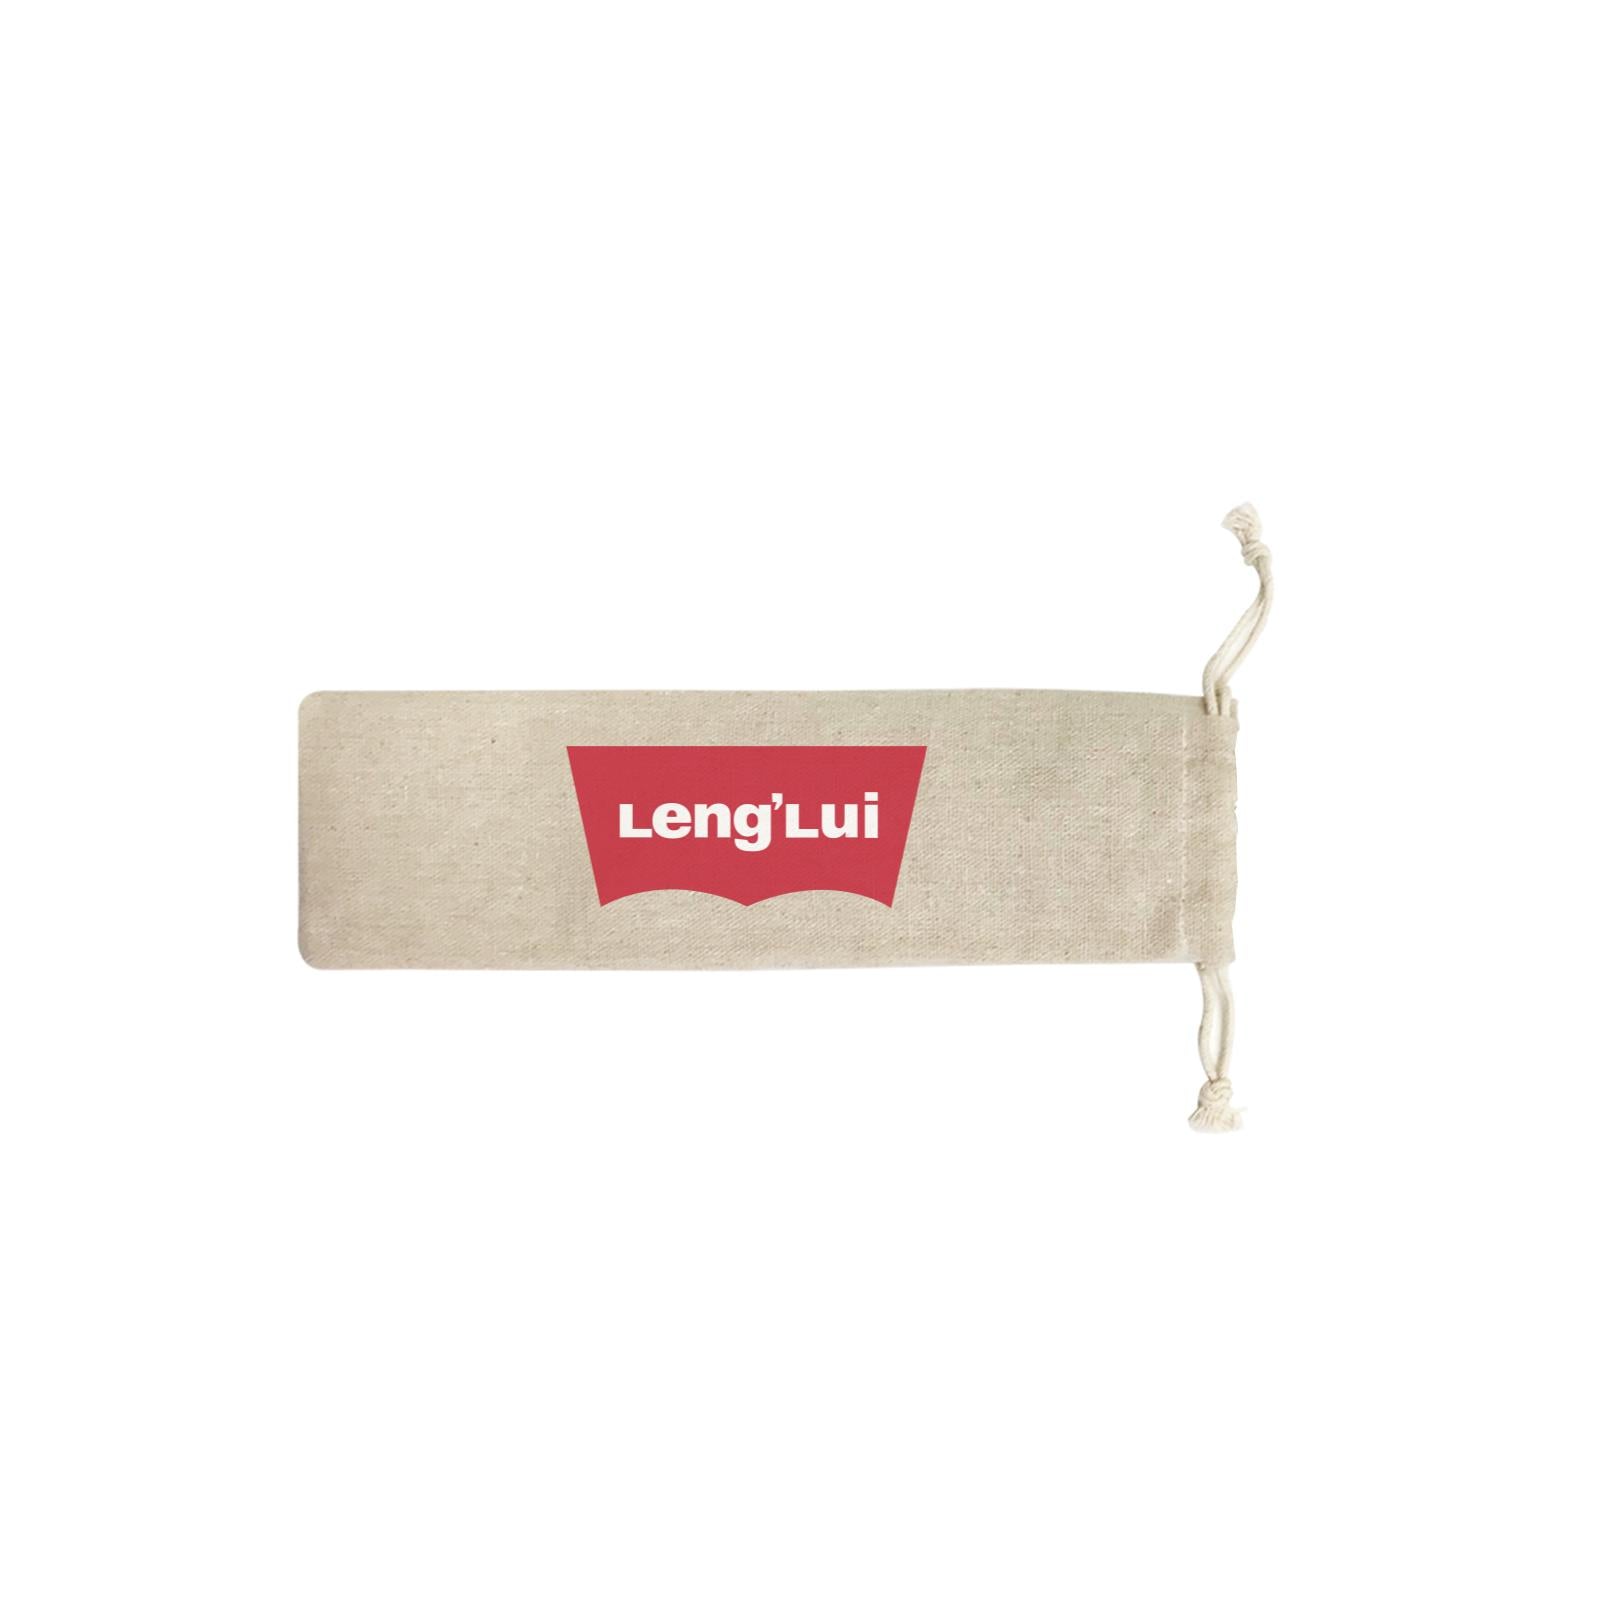 Slang Statement Lenglui SB Straw Pouch (No Straws included)